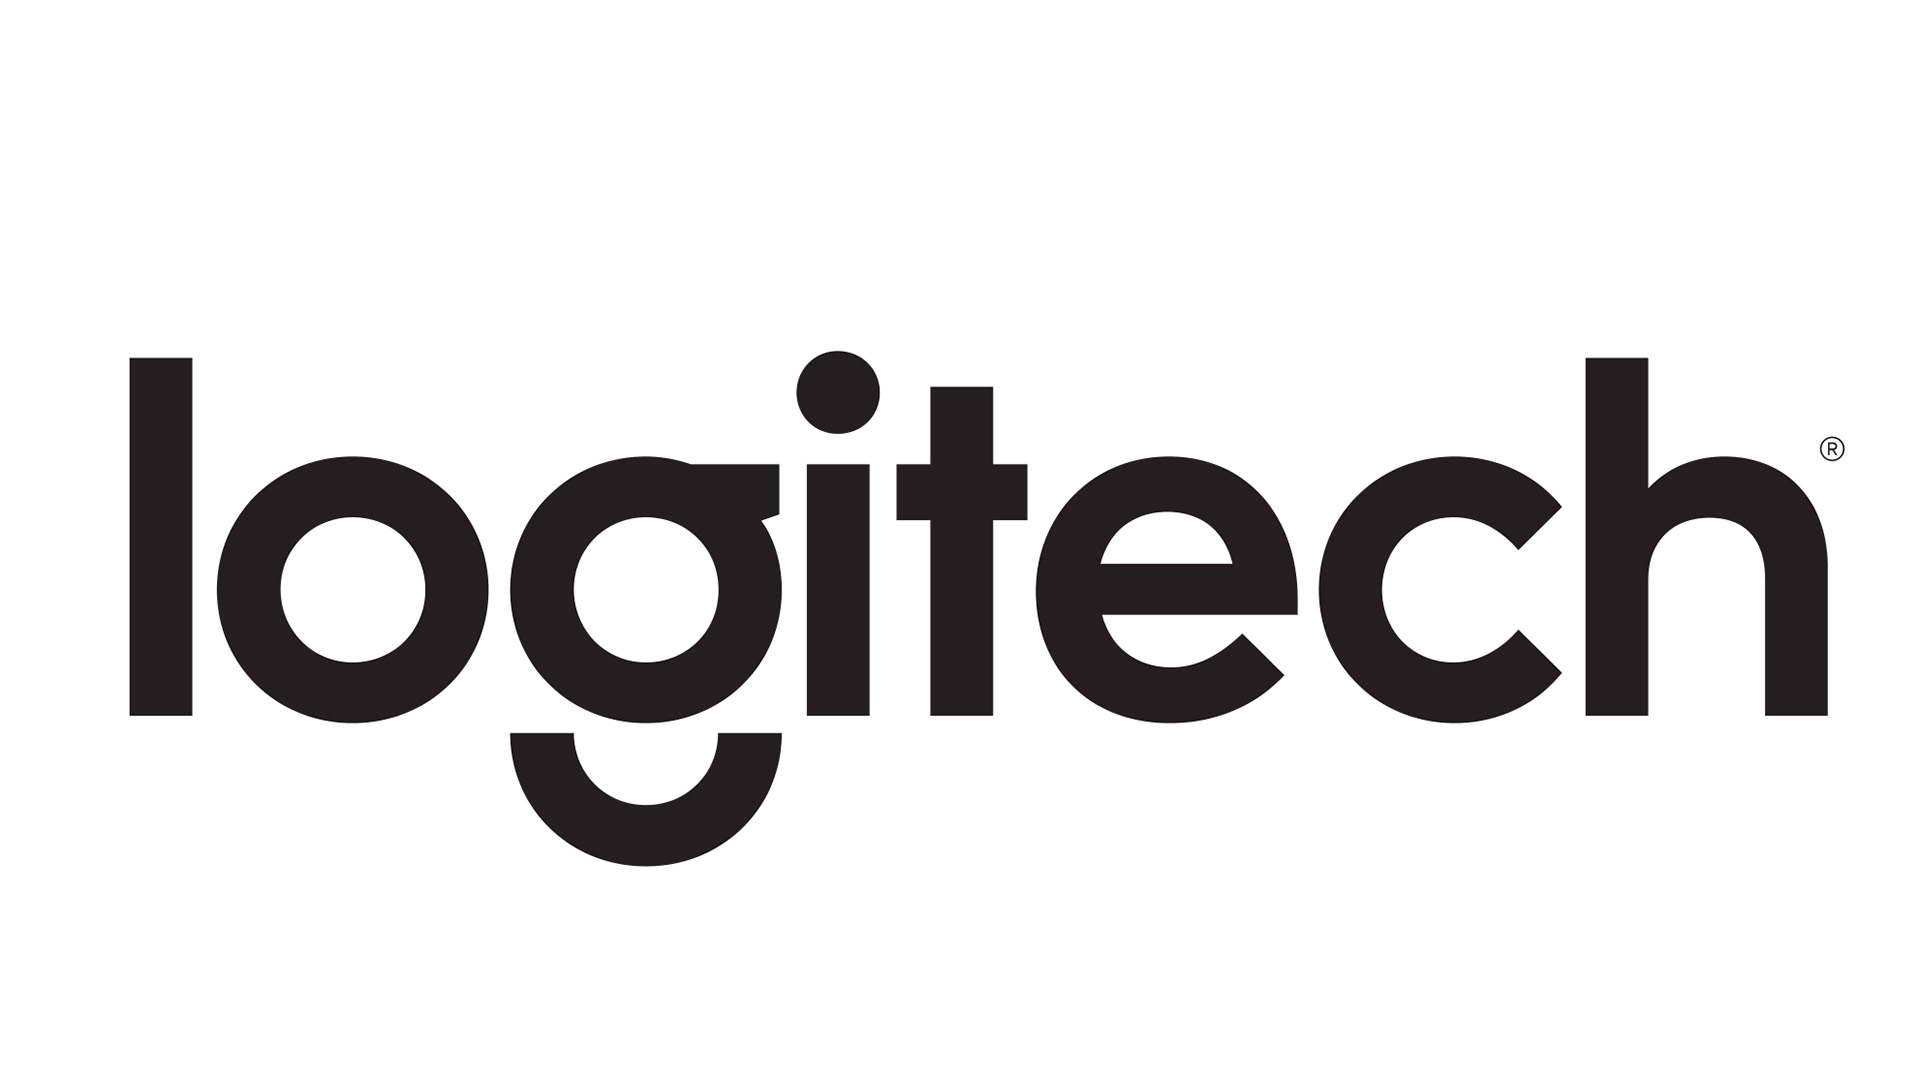 The word Logitech in small caps as its logo